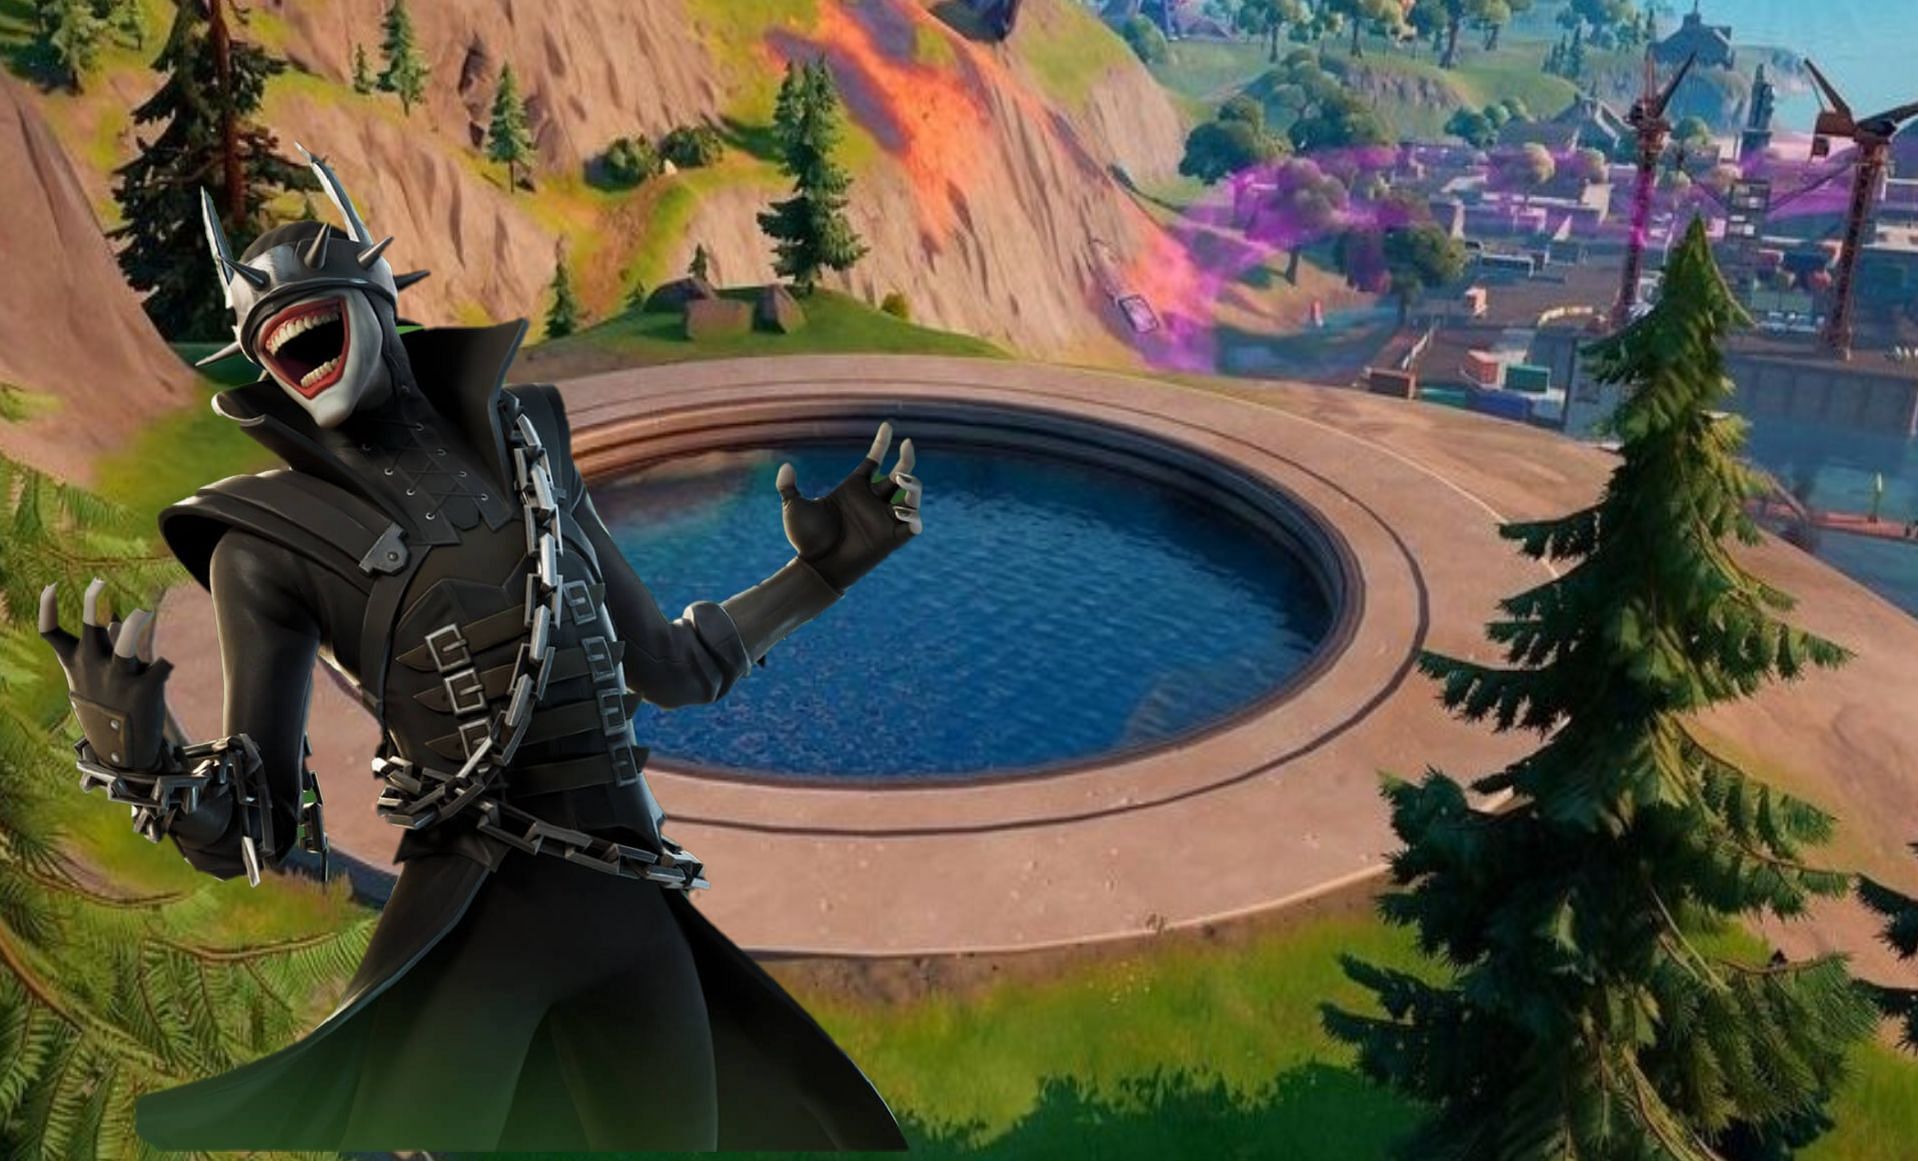 The Grotto could change into Bat Cave in Fortnite Chapter 2 Season 8 (Image via Sportskeeda)